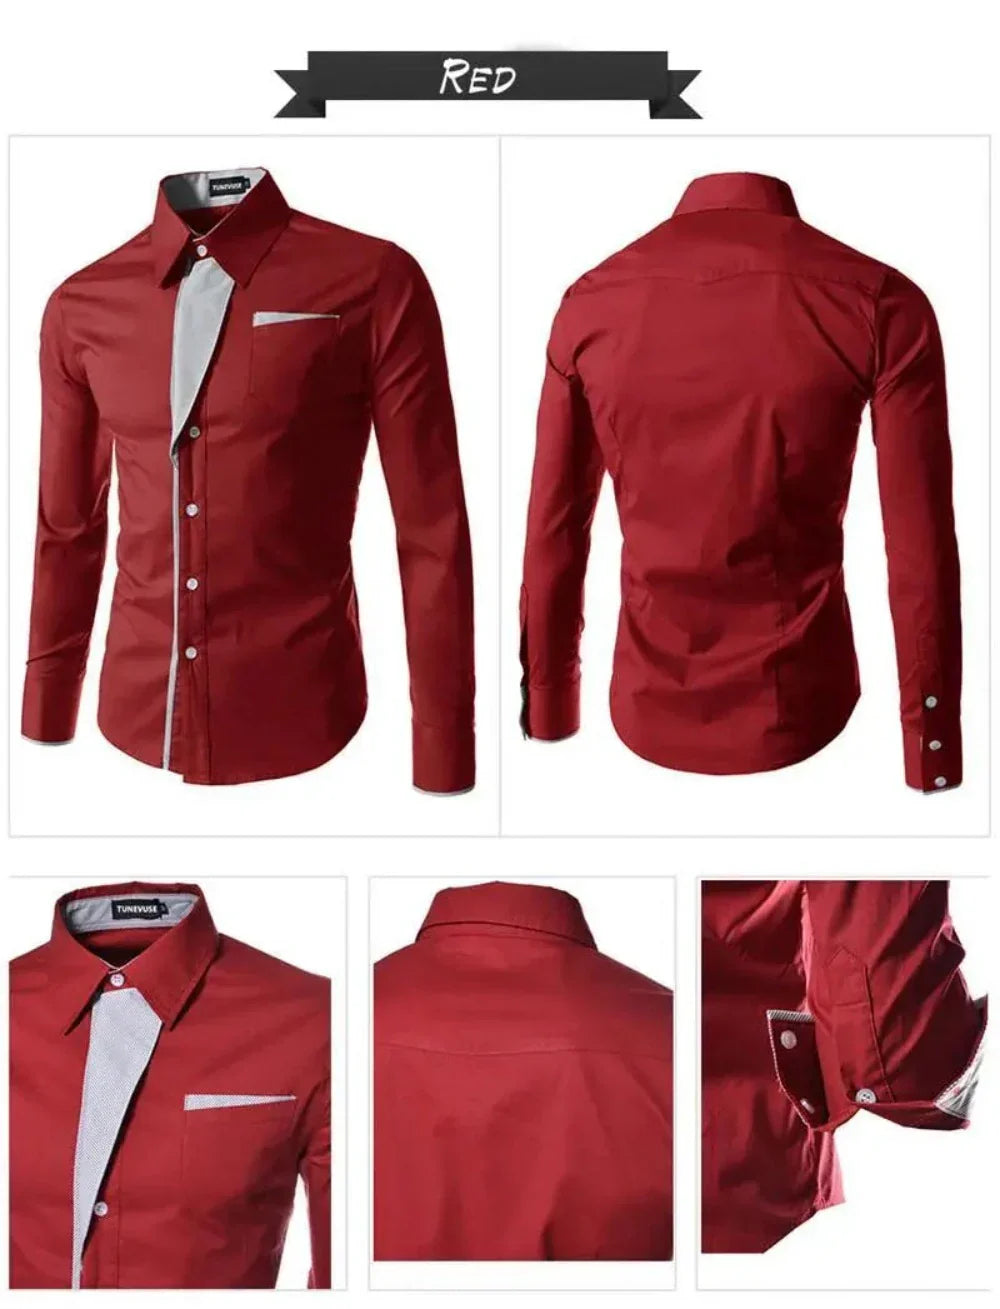 Mens Long Sleeve Button Front Shirt with Front Collar Details